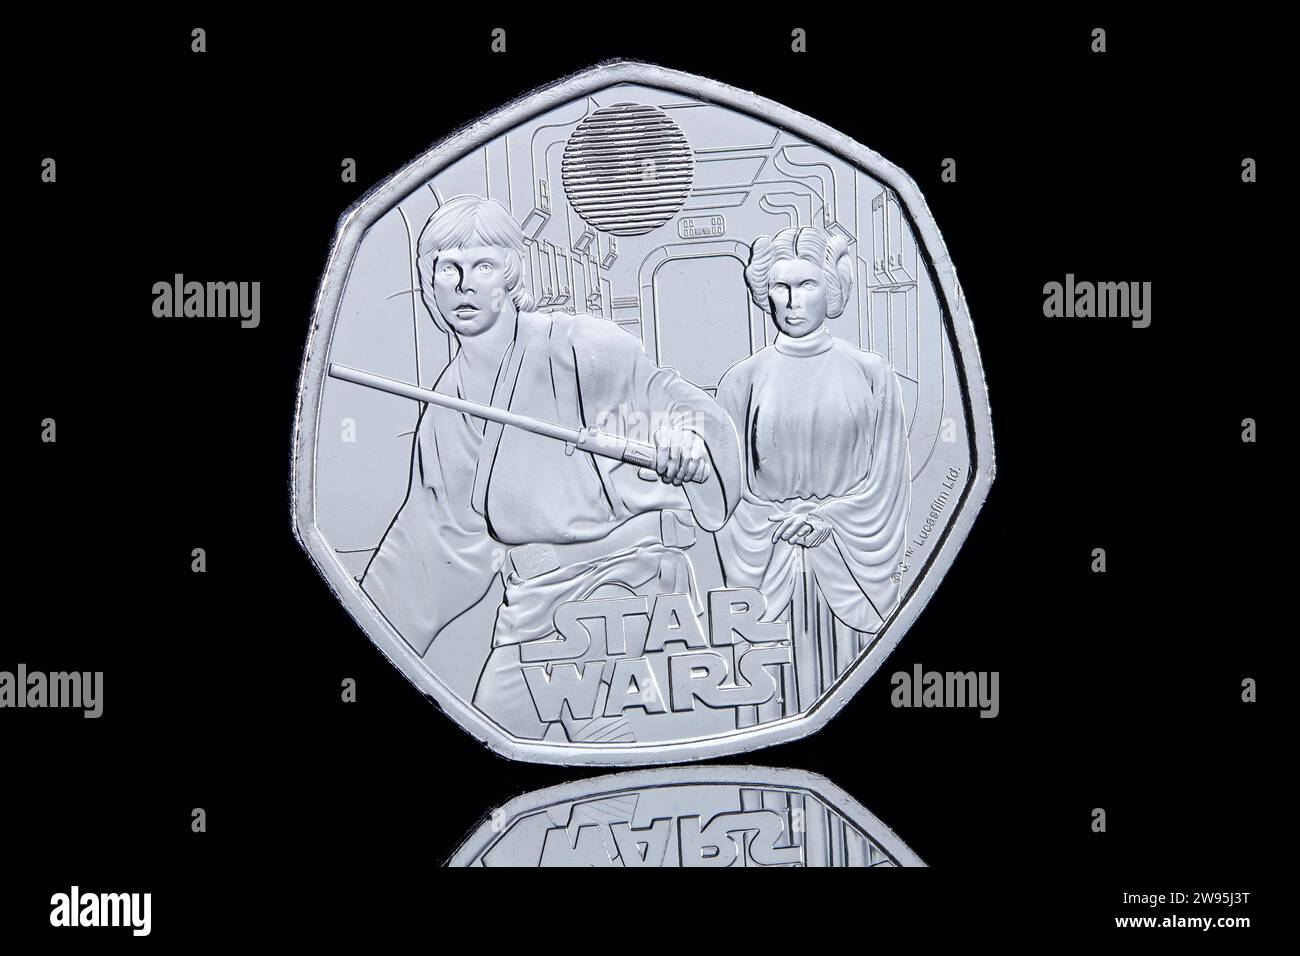 https://c8.alamy.com/comp/2W95J3T/the-3rd-coin-in-the-star-wars-50p-series-featuring-luke-skywalker-princess-leia-on-the-reverse-king-charles-iii-portrait-on-thr-obverse-2W95J3T.jpg